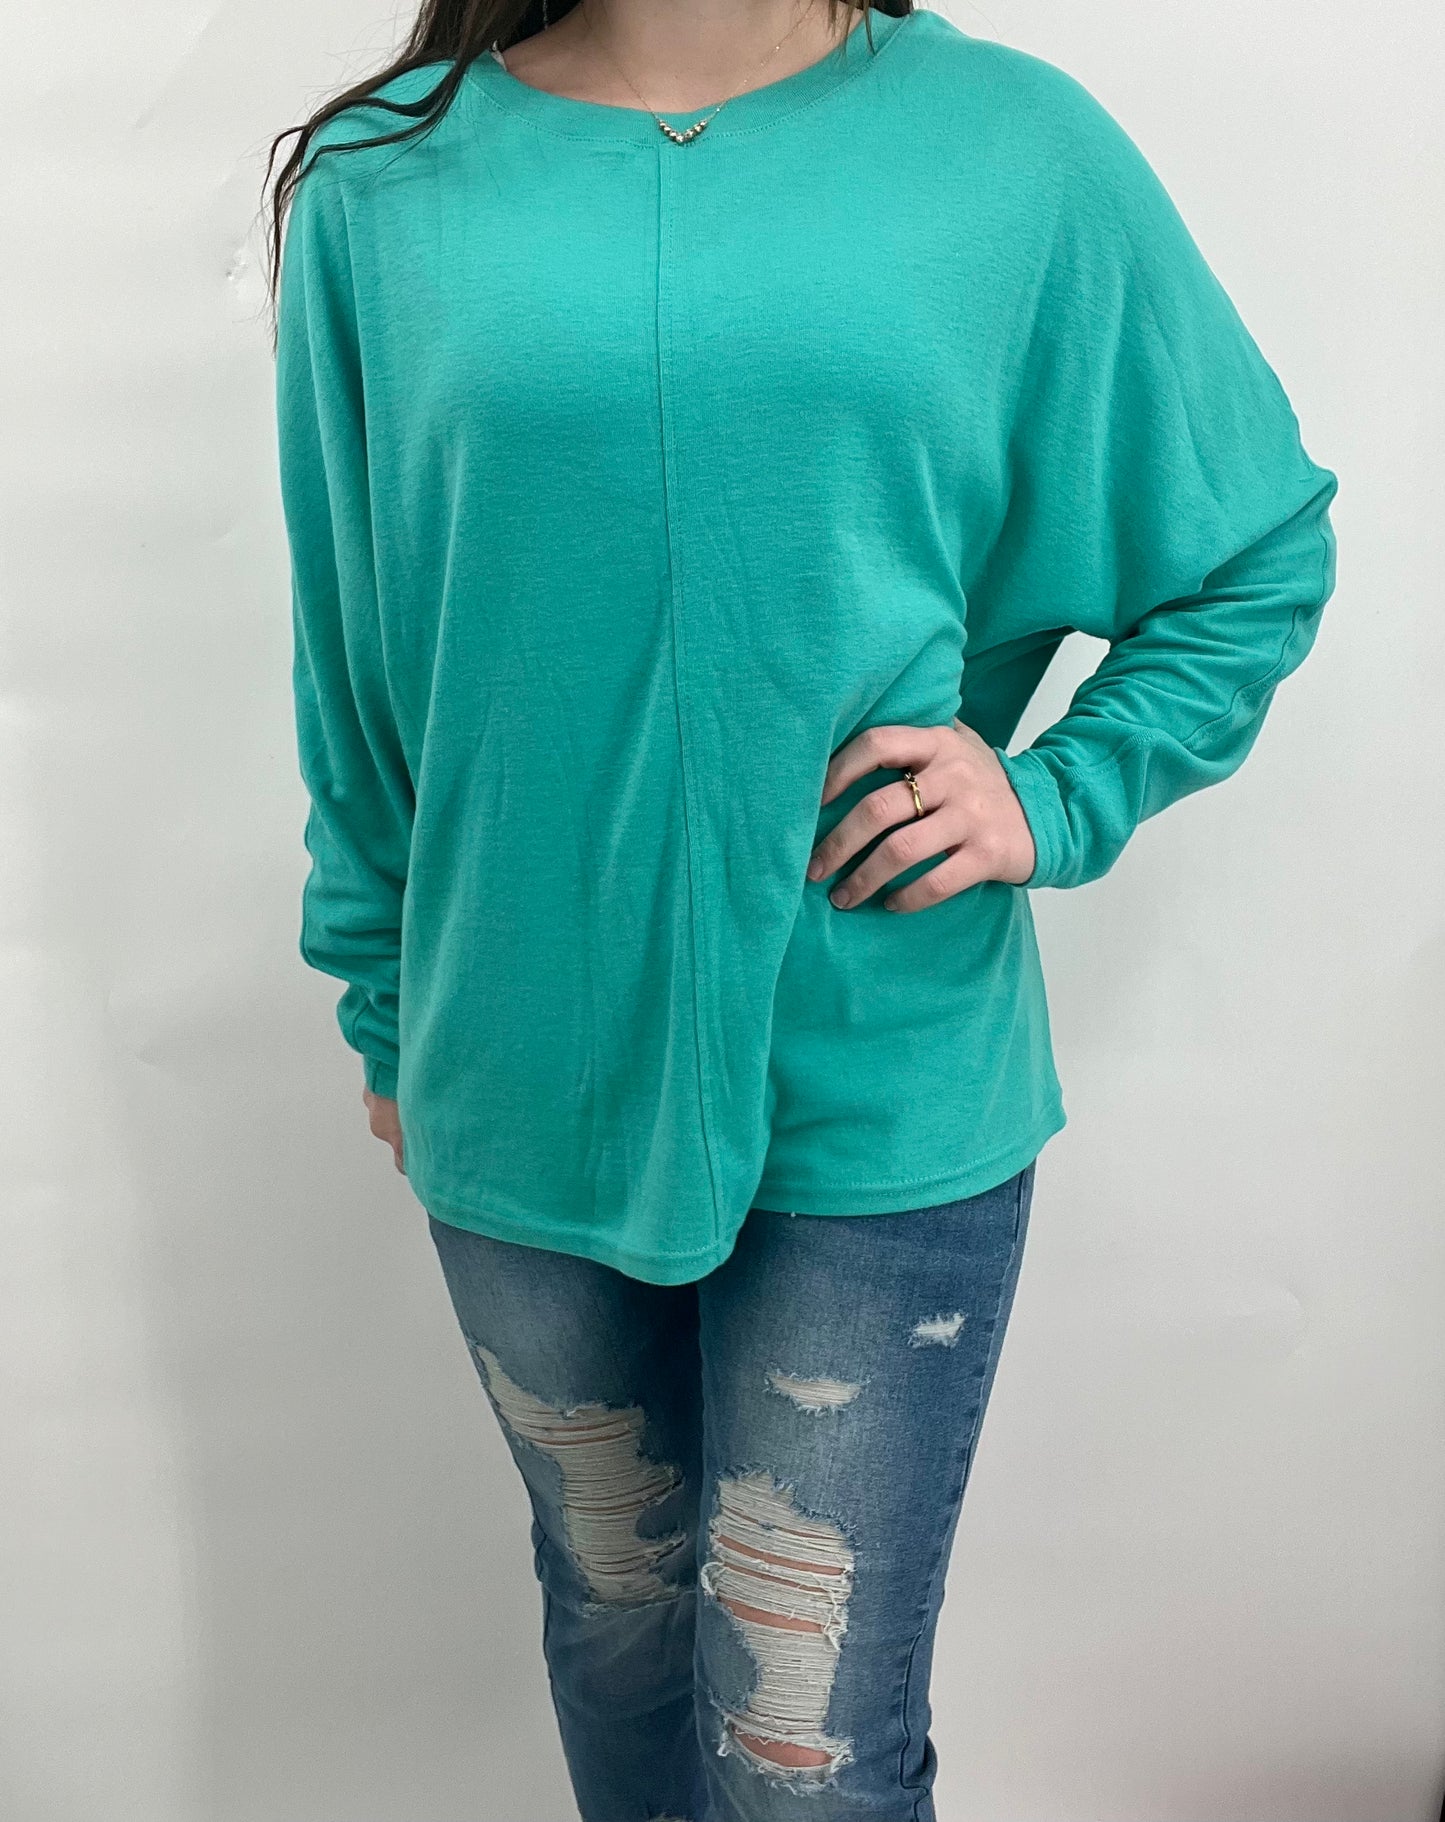 Beyond Basic Top in multiple colors